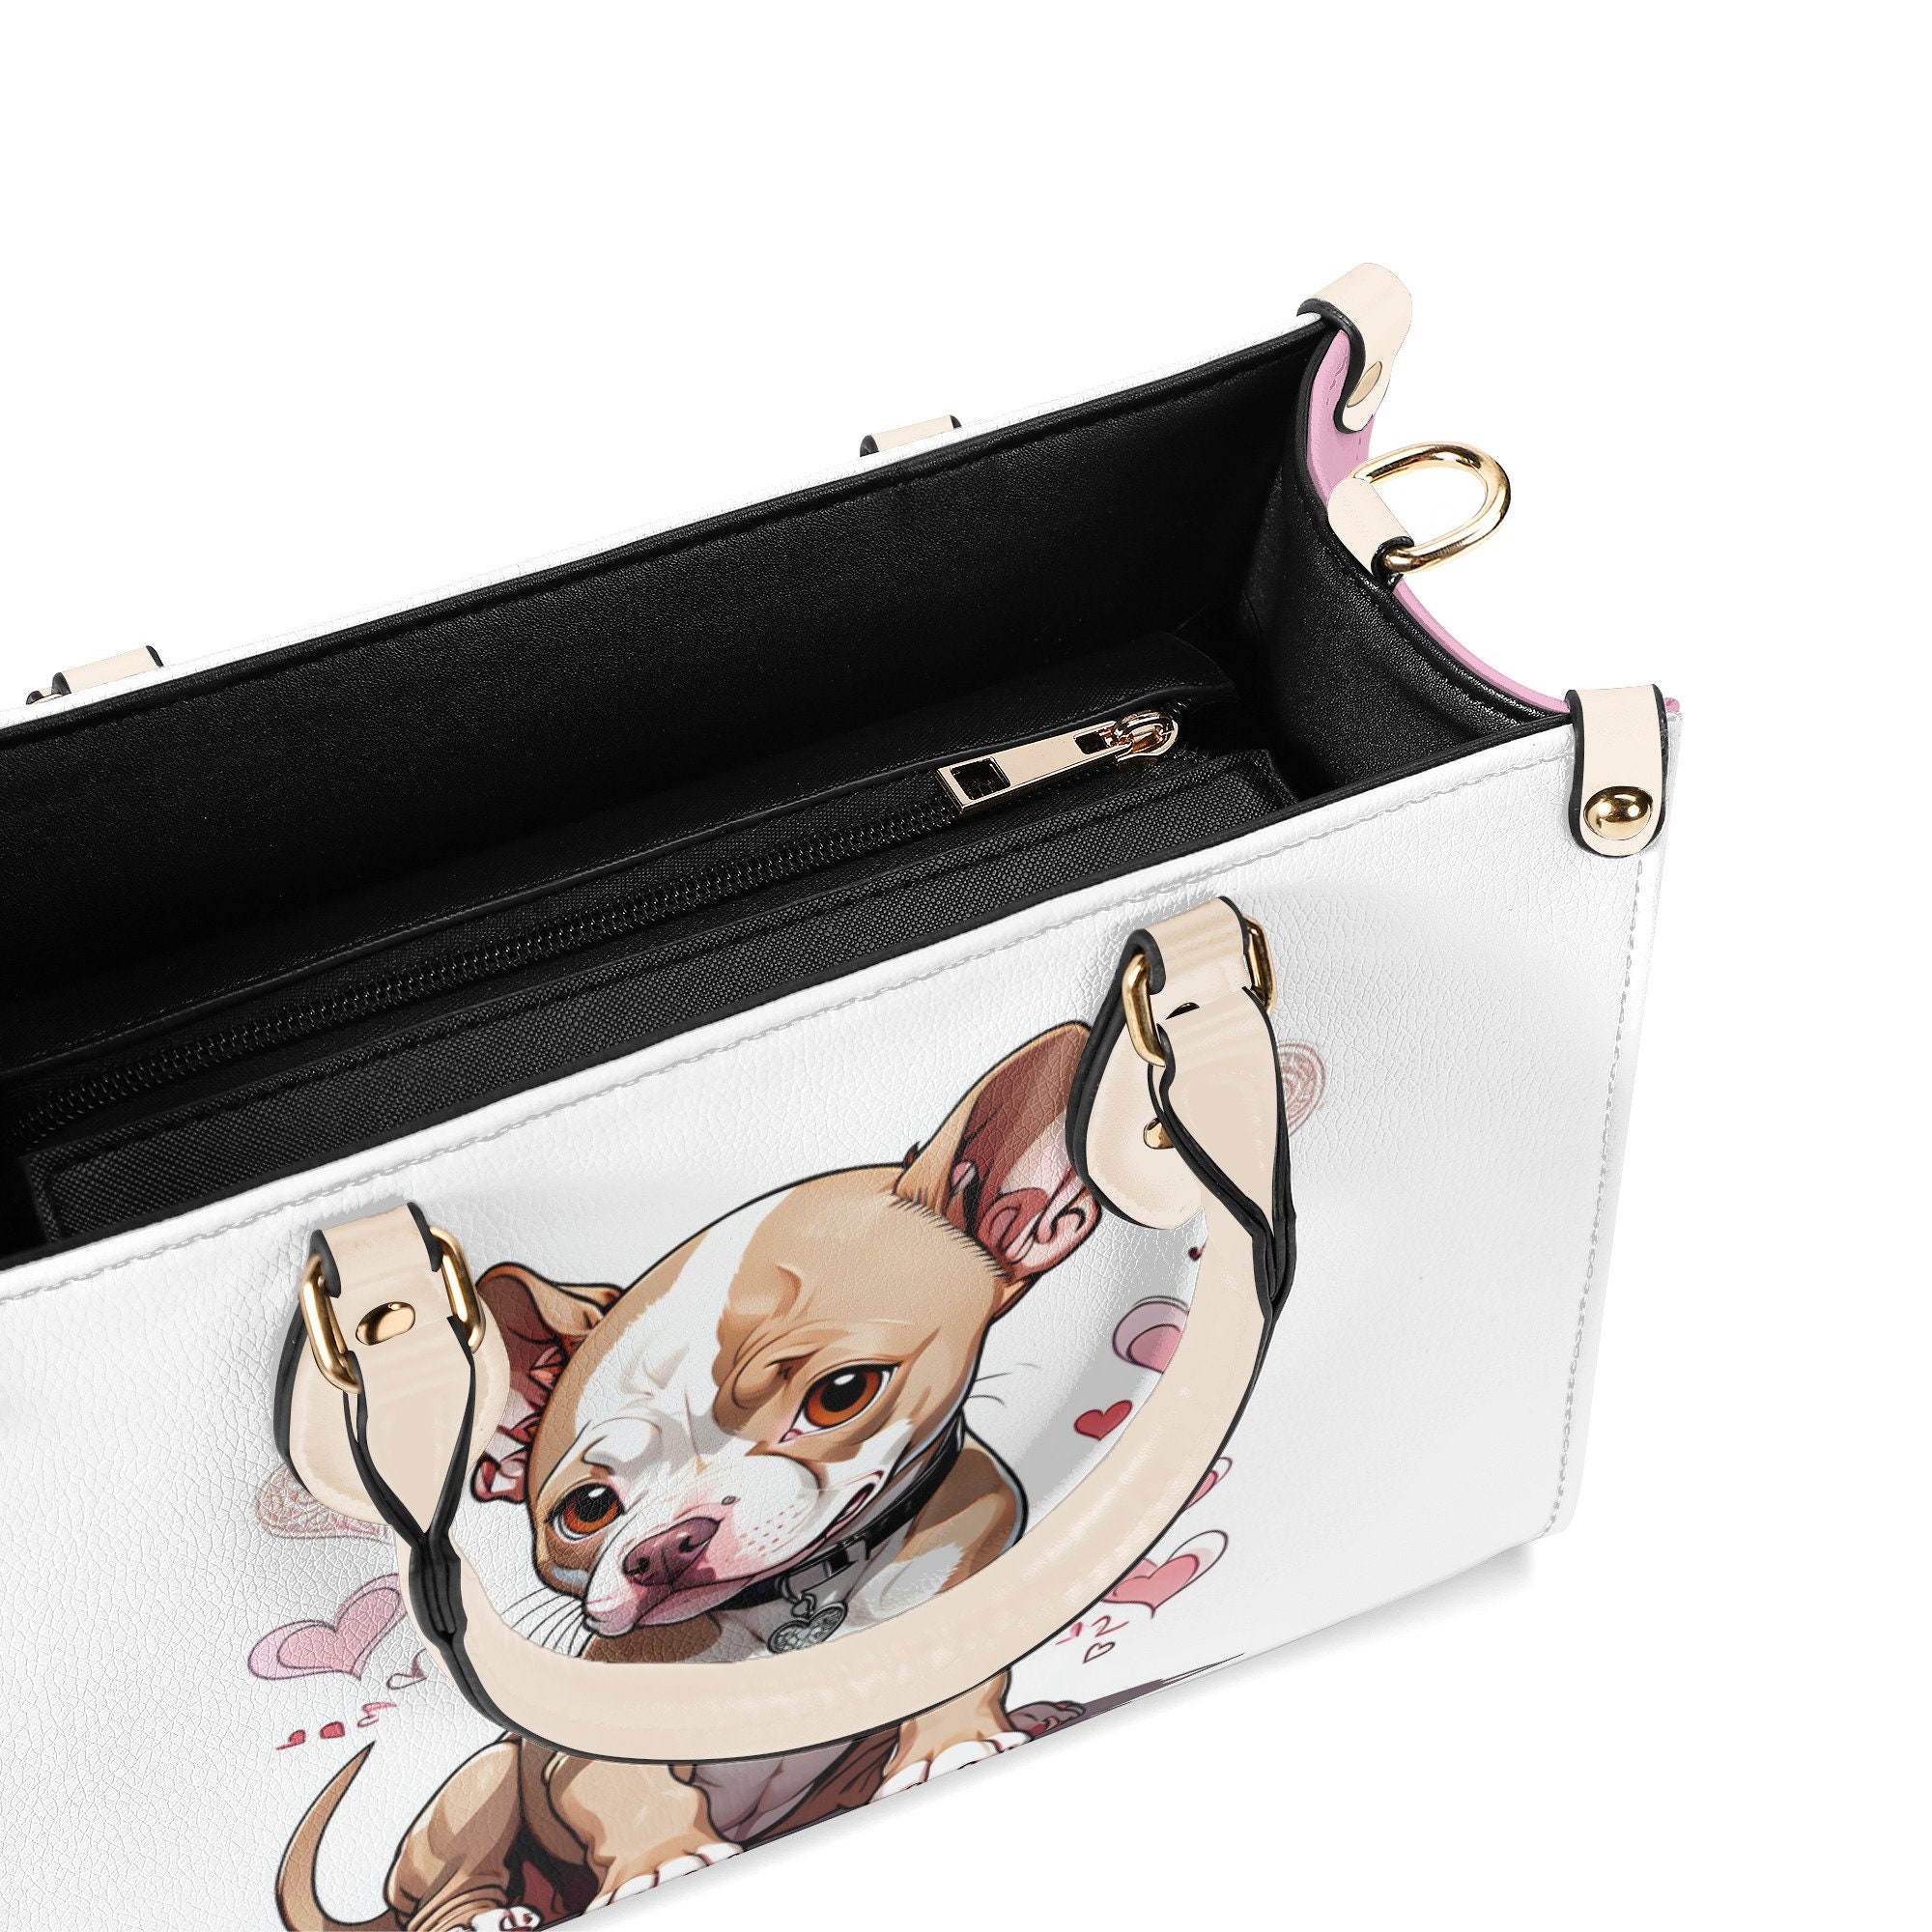 Pitbull Puppy Leather Handbag, Gift for Mother's Day